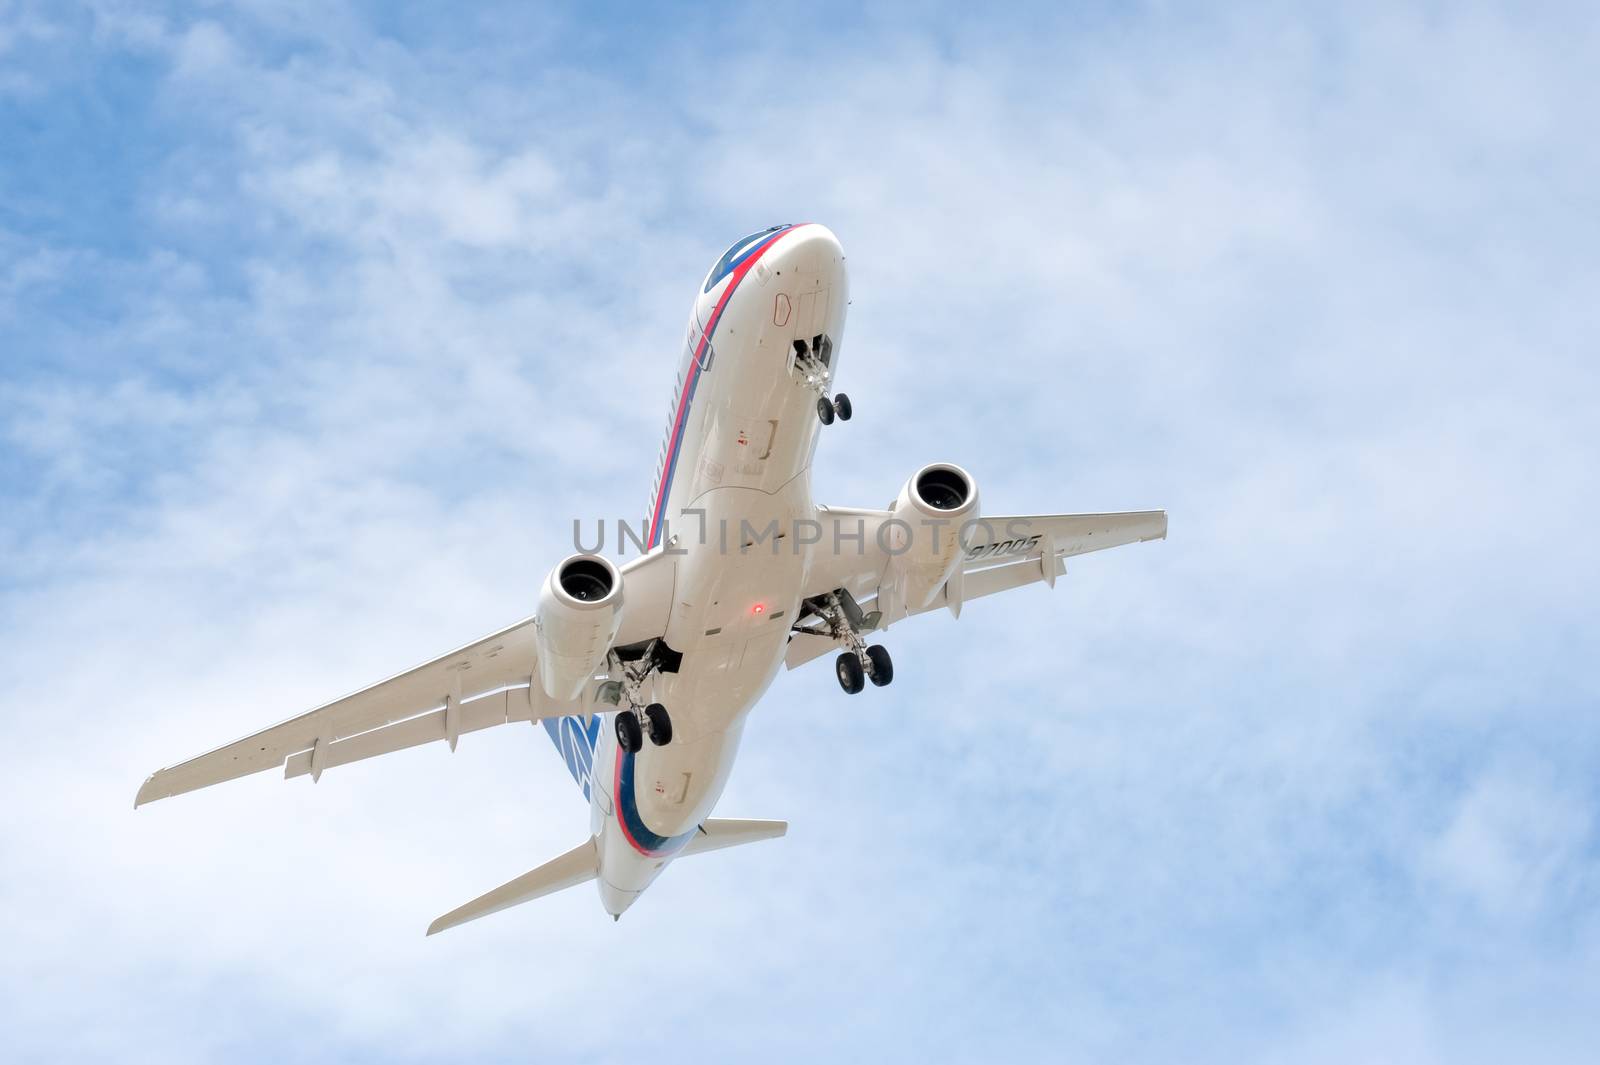 Farnborough, UK - July 20, 2010: Russian developed Sukhoi Superjet 100-95 with undercarriage down on landing approach to Farnborough Airshow, UK